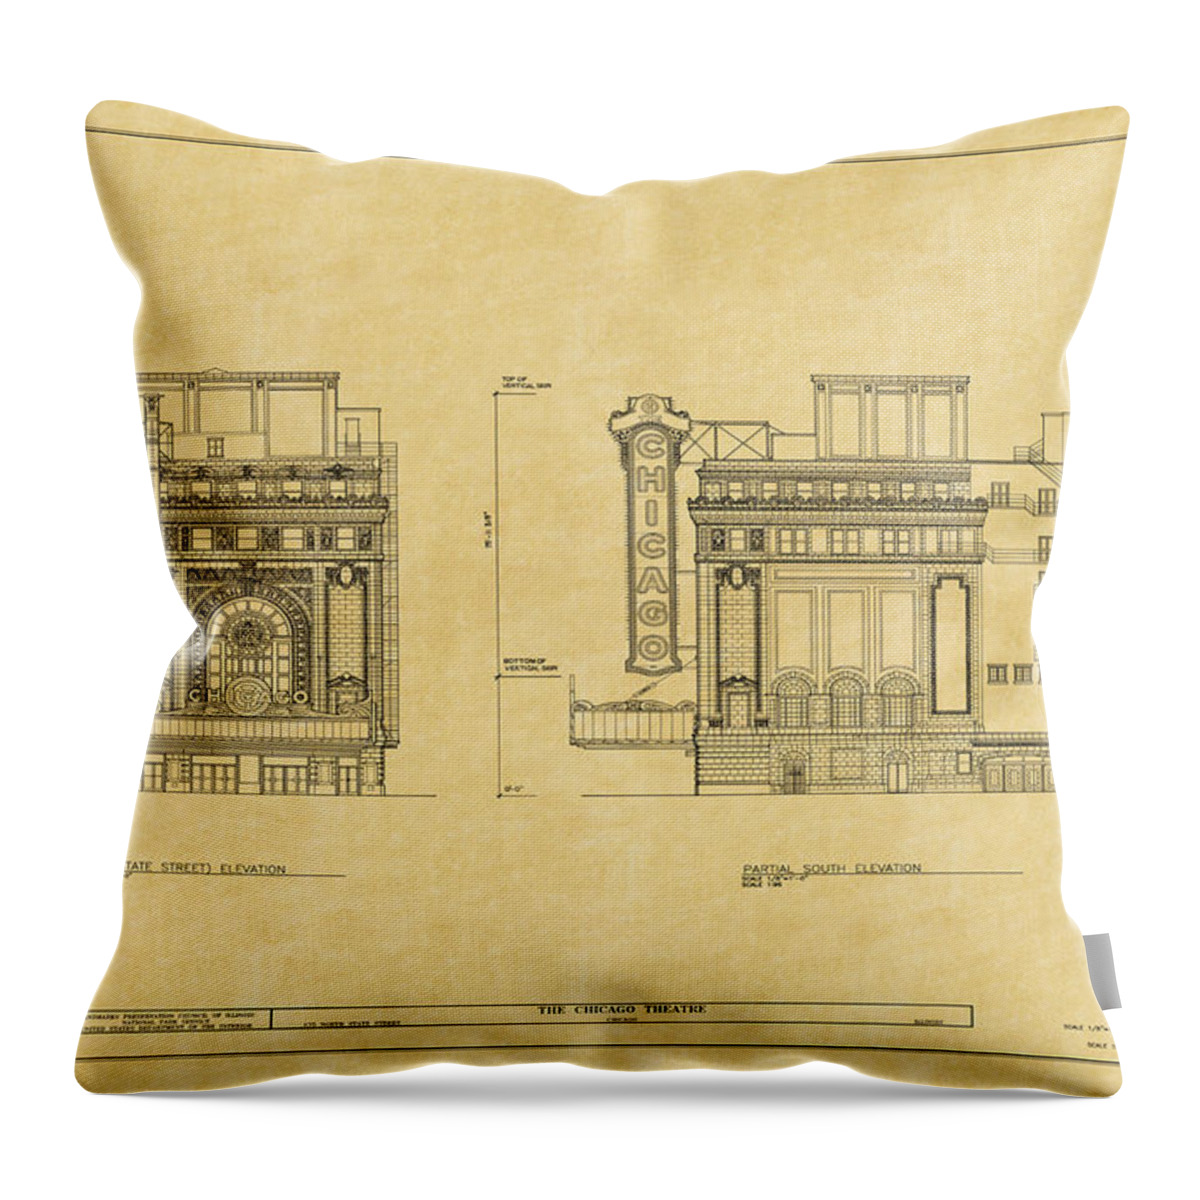 Chicago Theatre Throw Pillow featuring the photograph Chicago Theatre Blueprint 2 by Andrew Fare